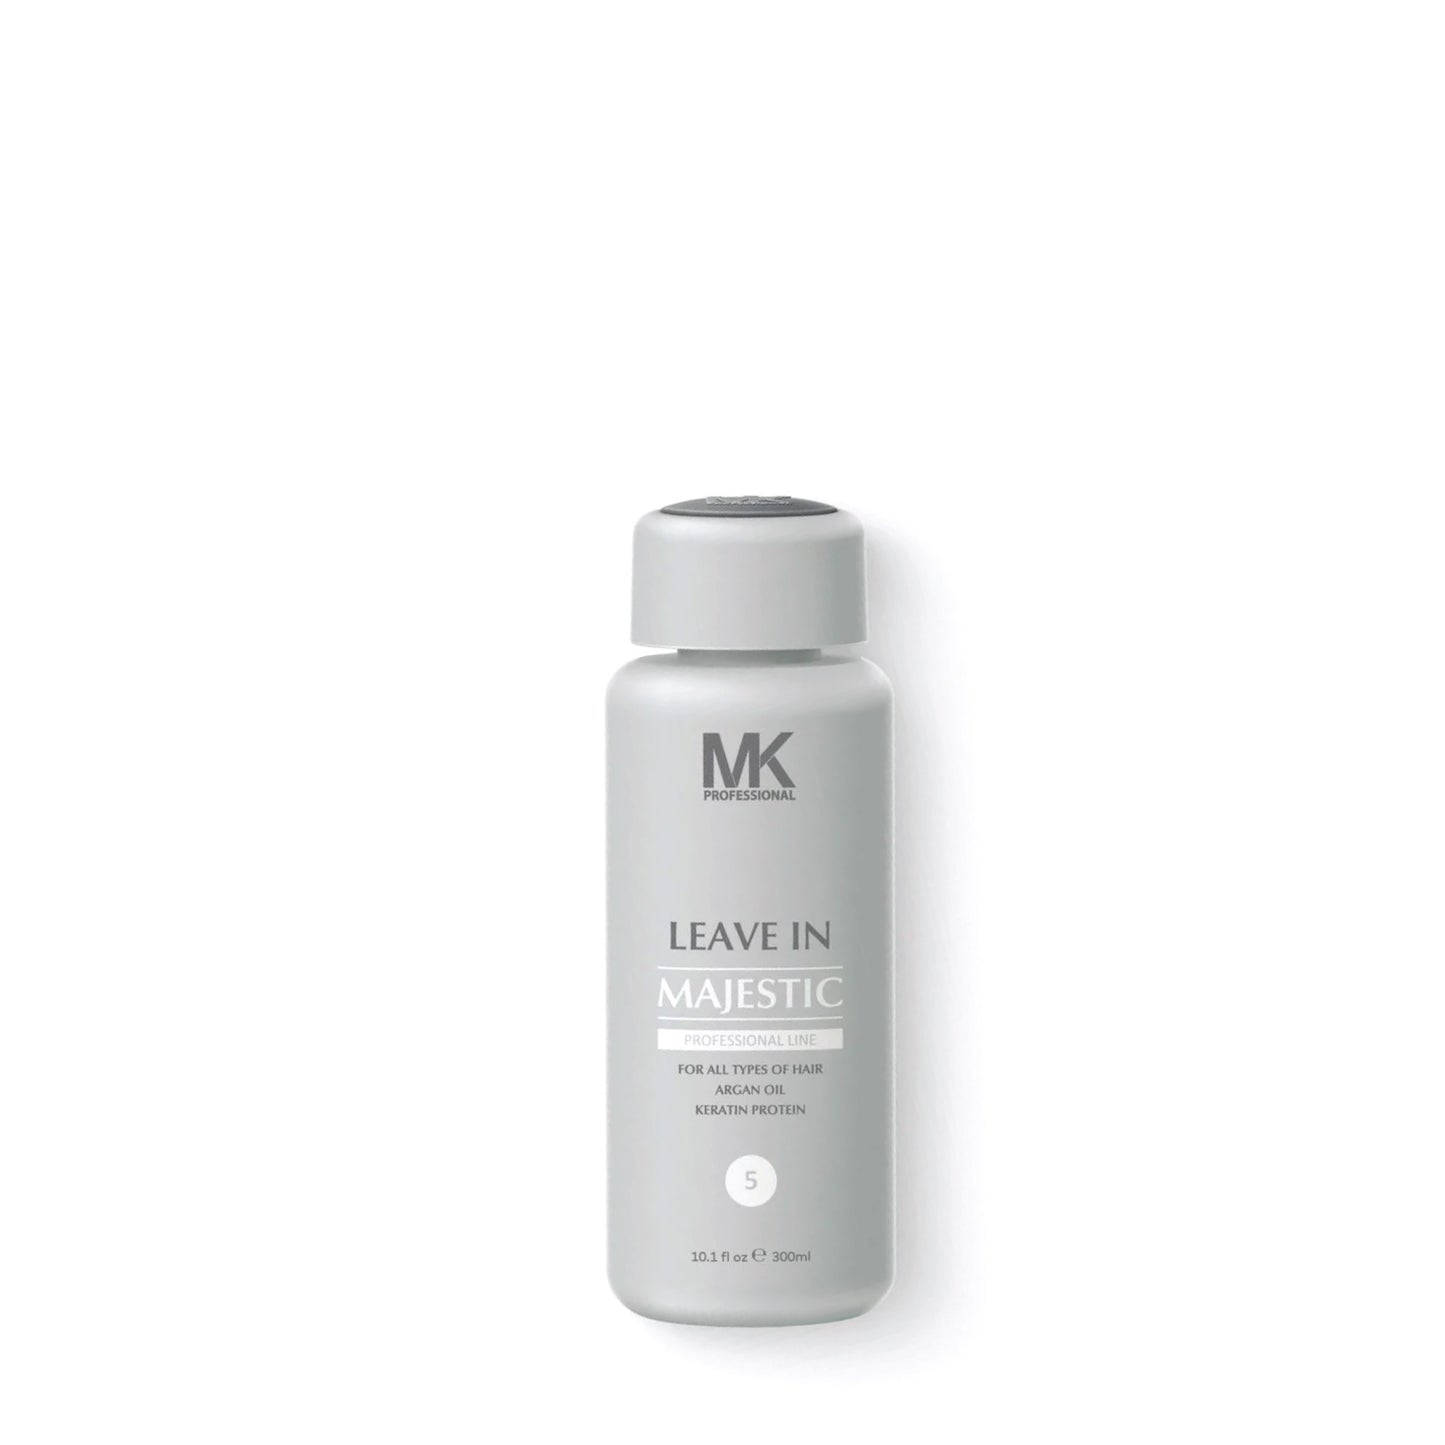 Majestic Leave In Styling Cream